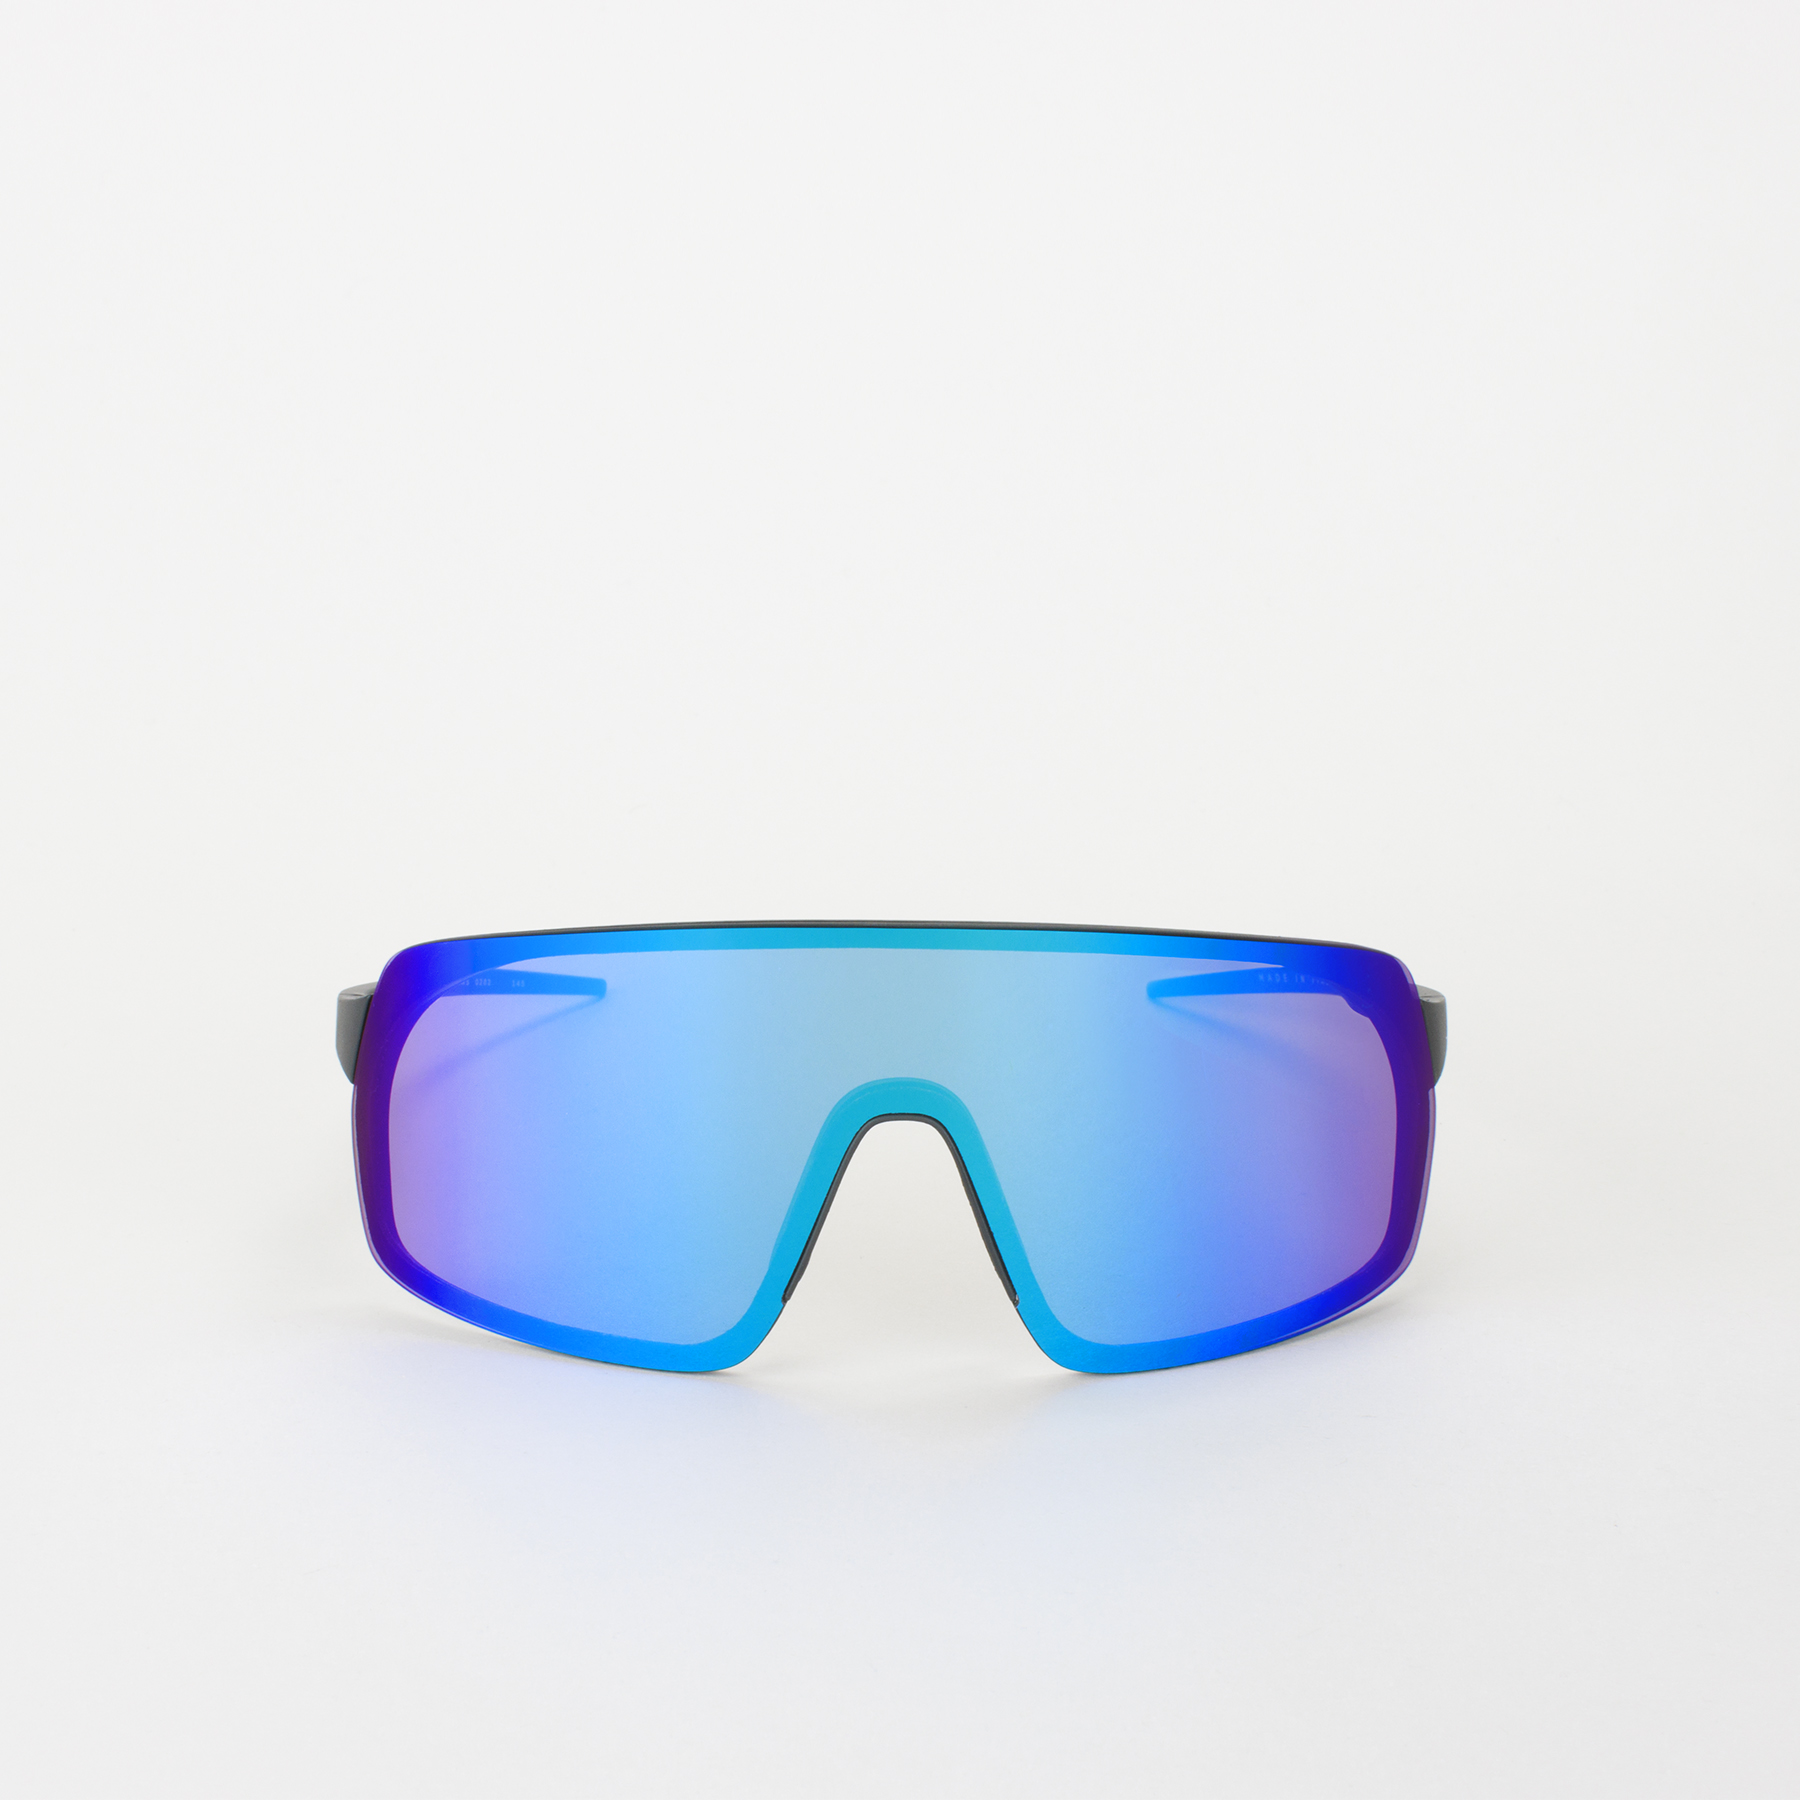 Sports sunglasses OUT OF Rams blue on the white background, view slightly from the side